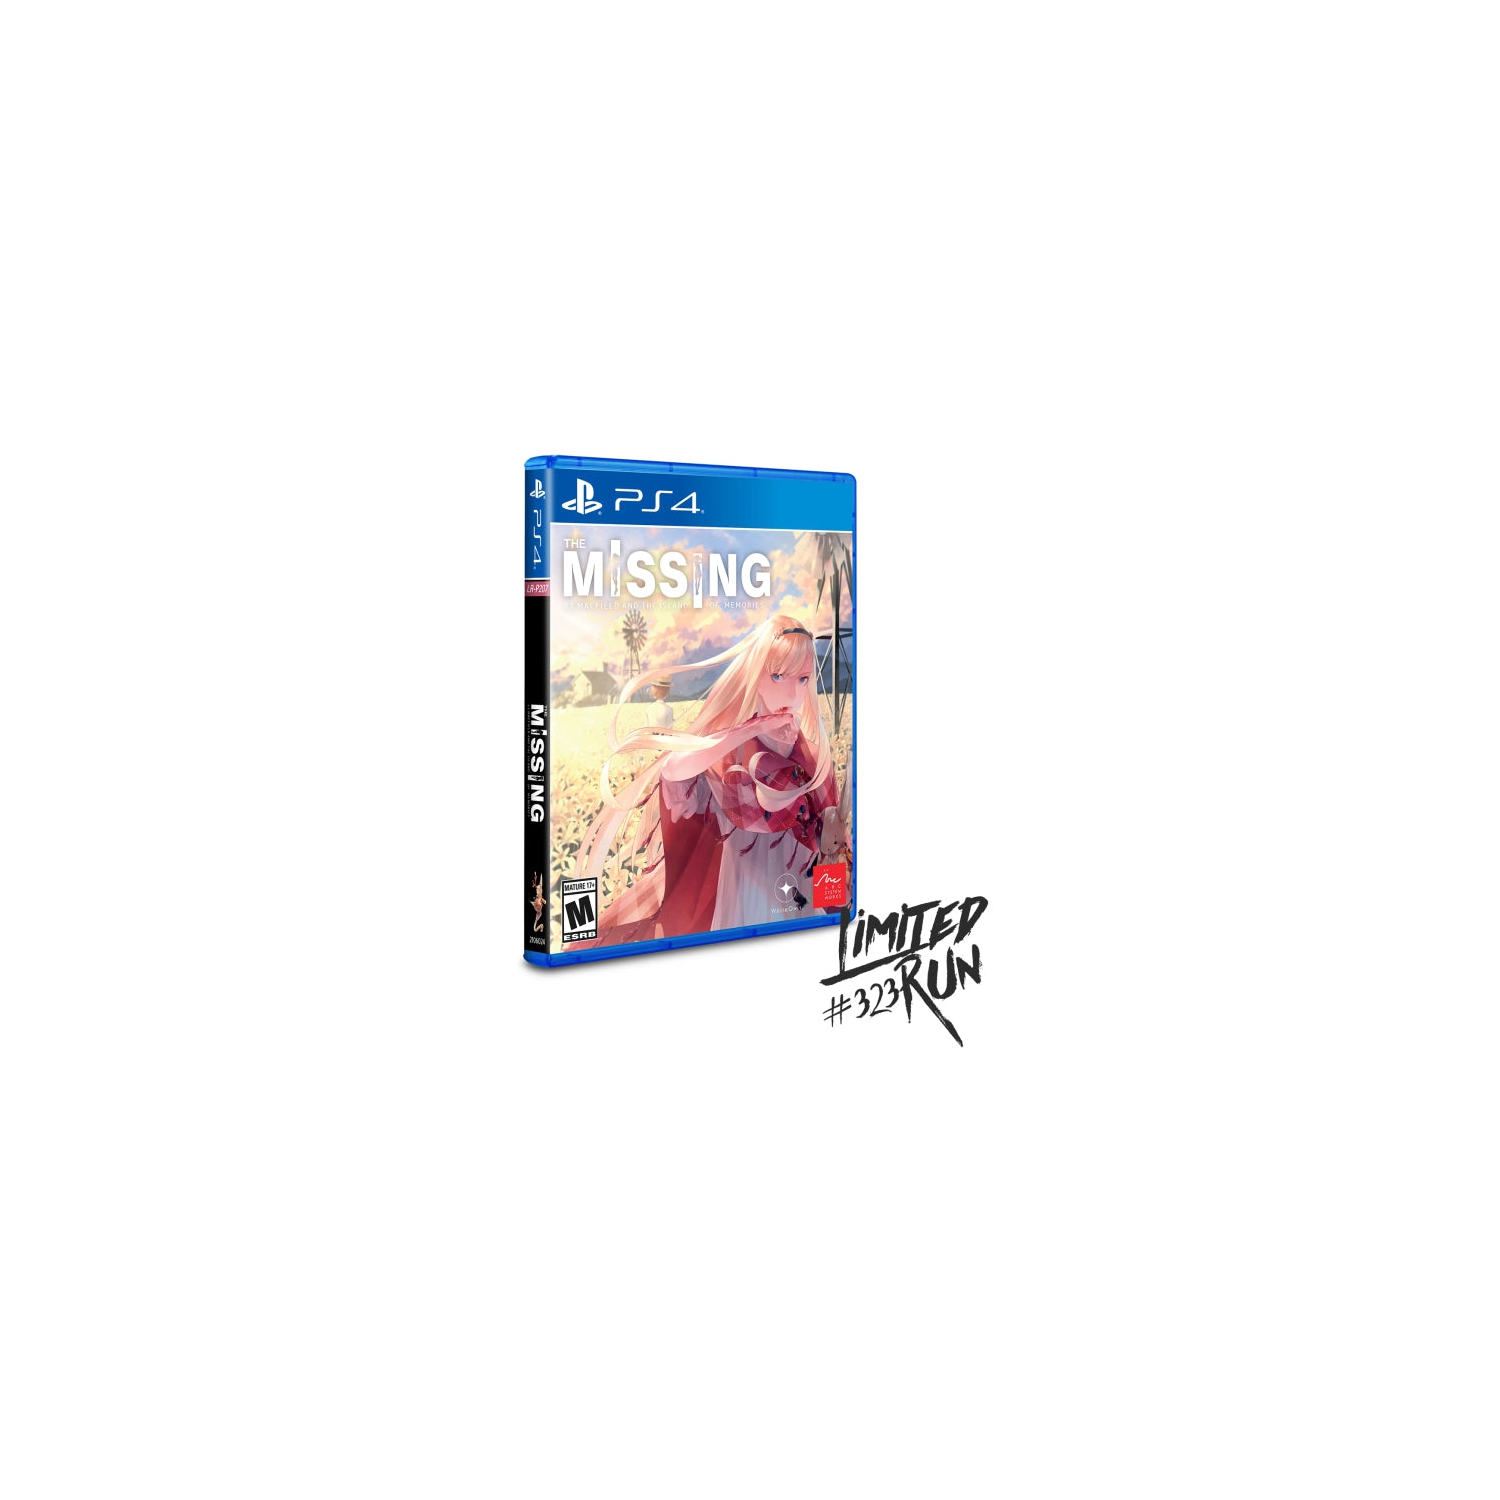 The Missing: JJ Macfield and the Island of Memories - Limited Run #323 [PlayStation 4]